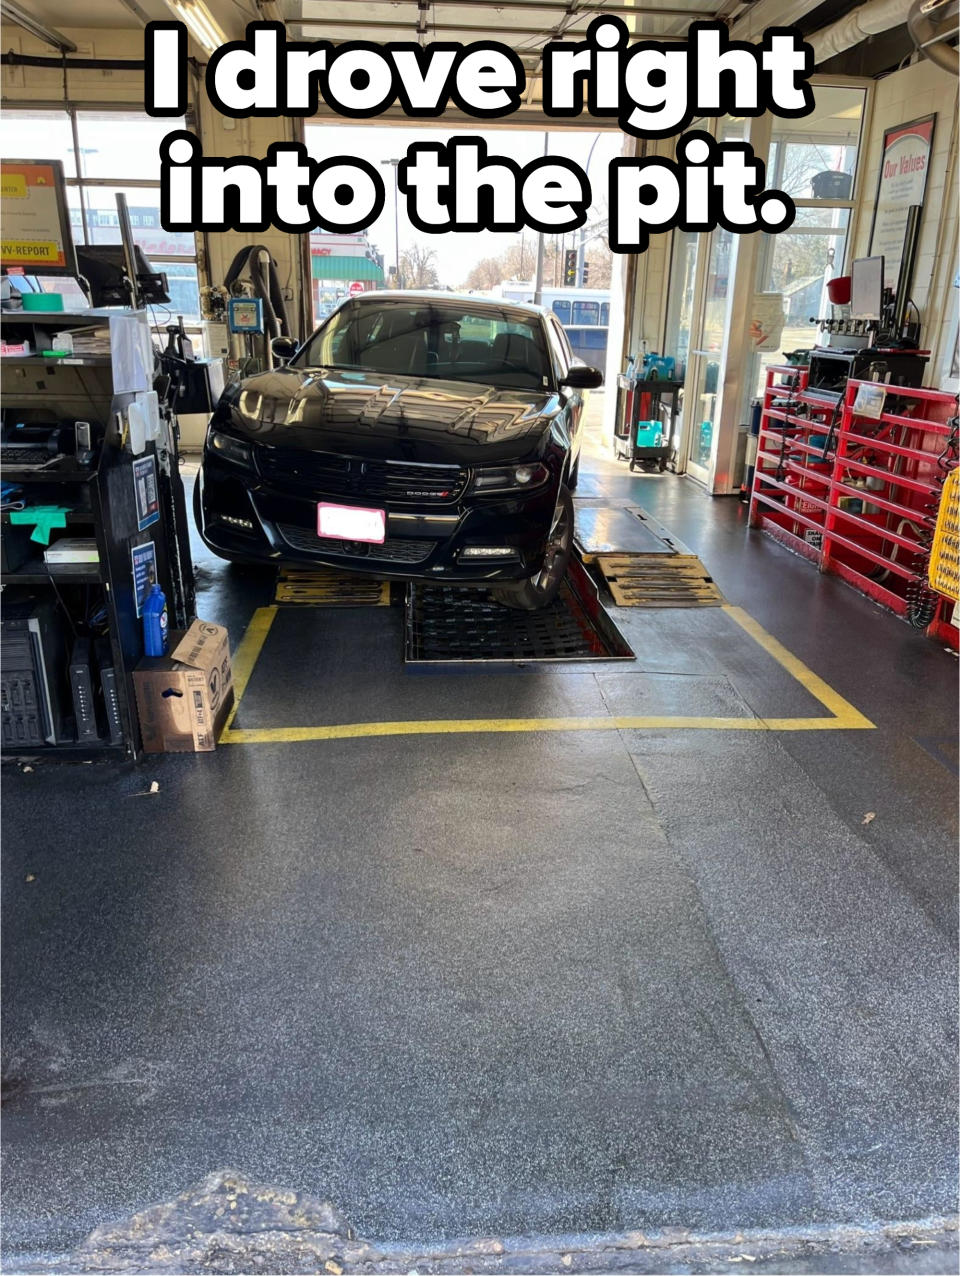 Car positioned on an auto service bay for maintenance or inspection